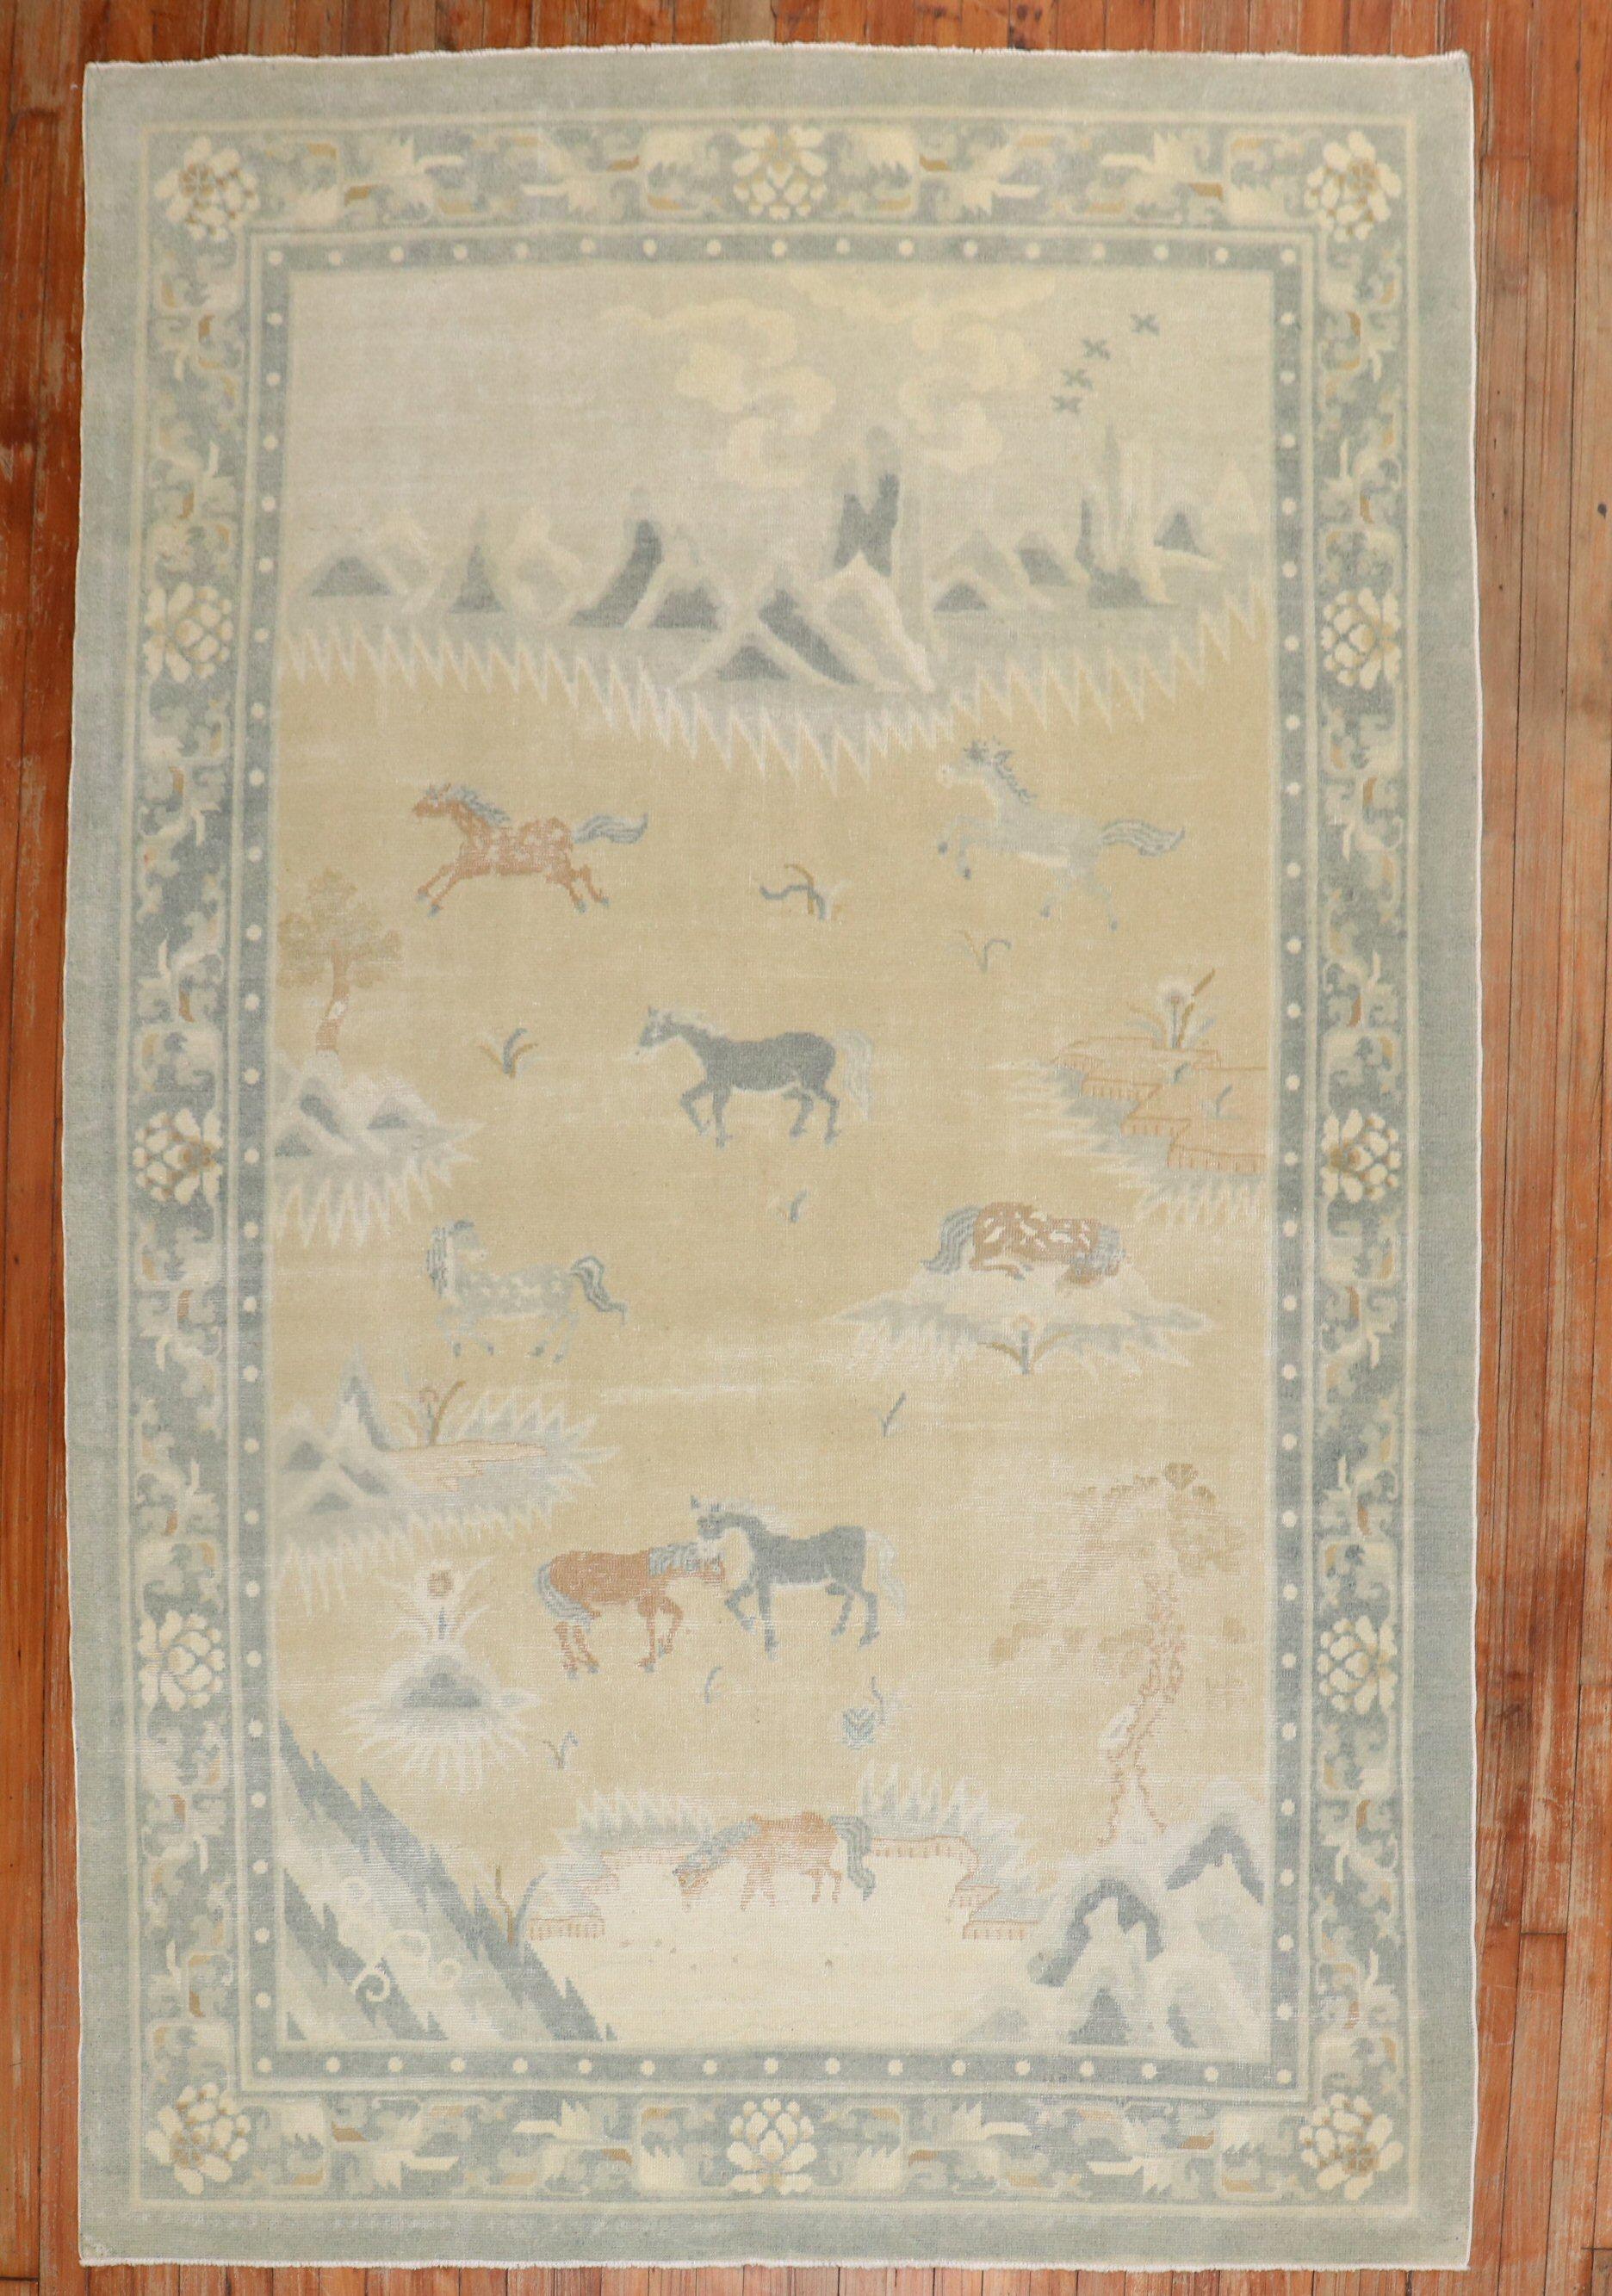 An early-20th century conversational Chinese pictorial rug with a herd of horses on a neutral color ground.

Measures: 5'7